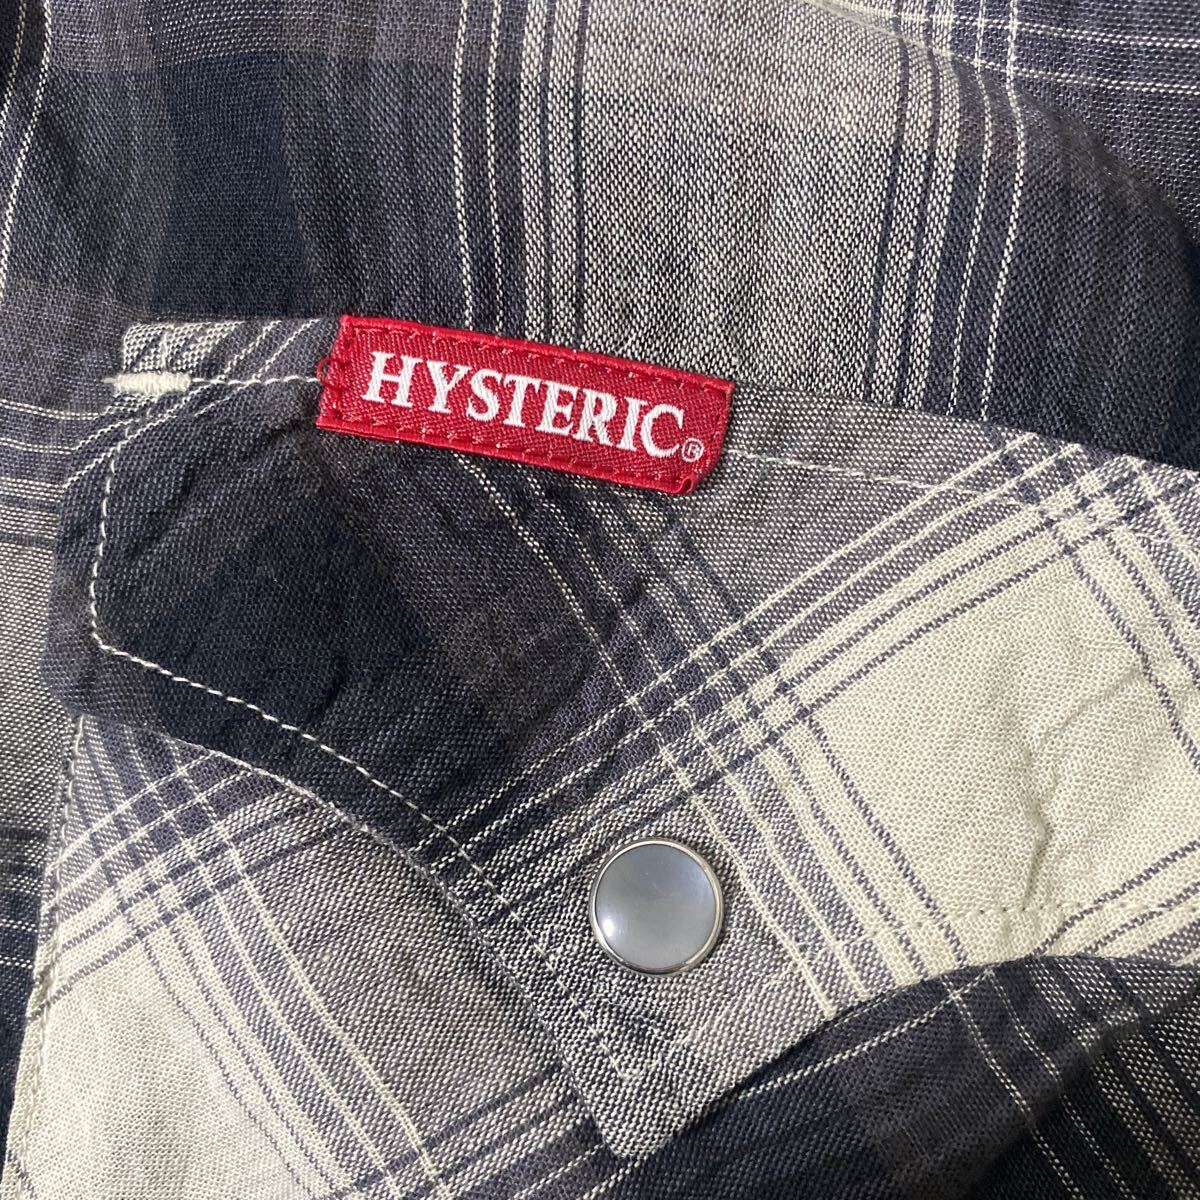  beautiful goods Hysteric Glamour girl chain stitch on blur check western shirt S embroidery hysteric